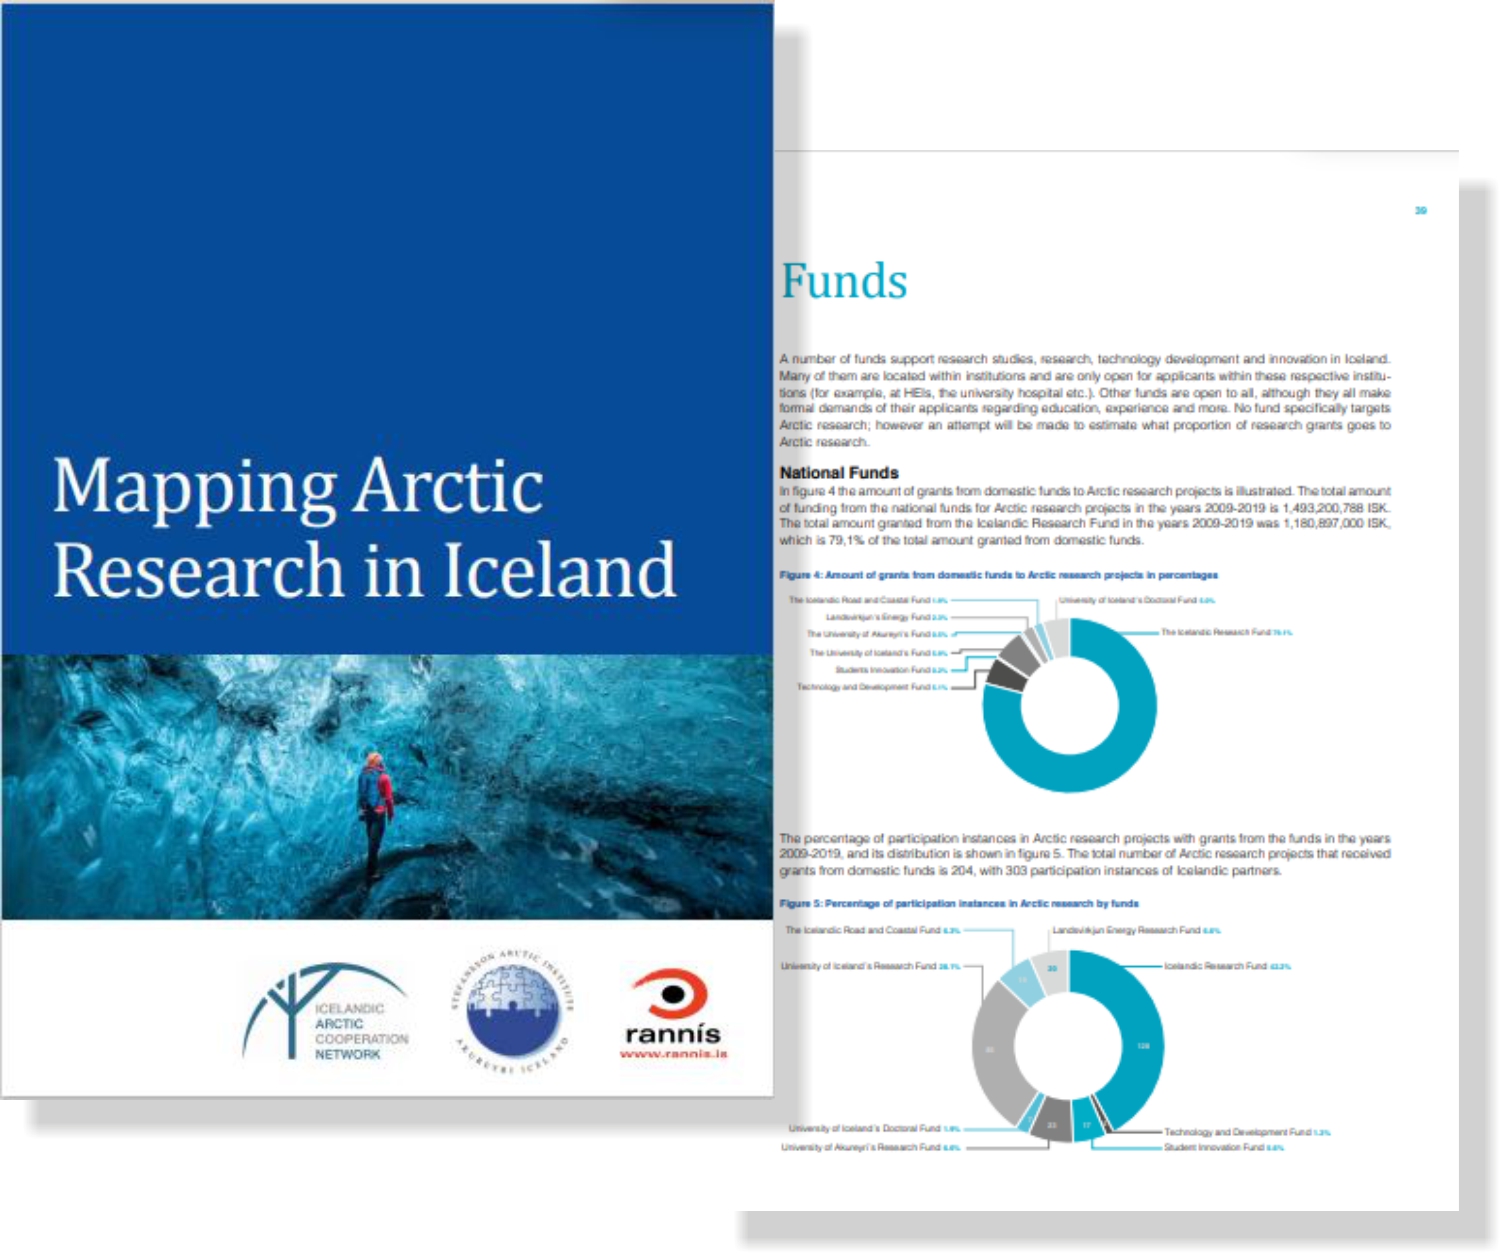 Mapping Arctic Research in Iceland